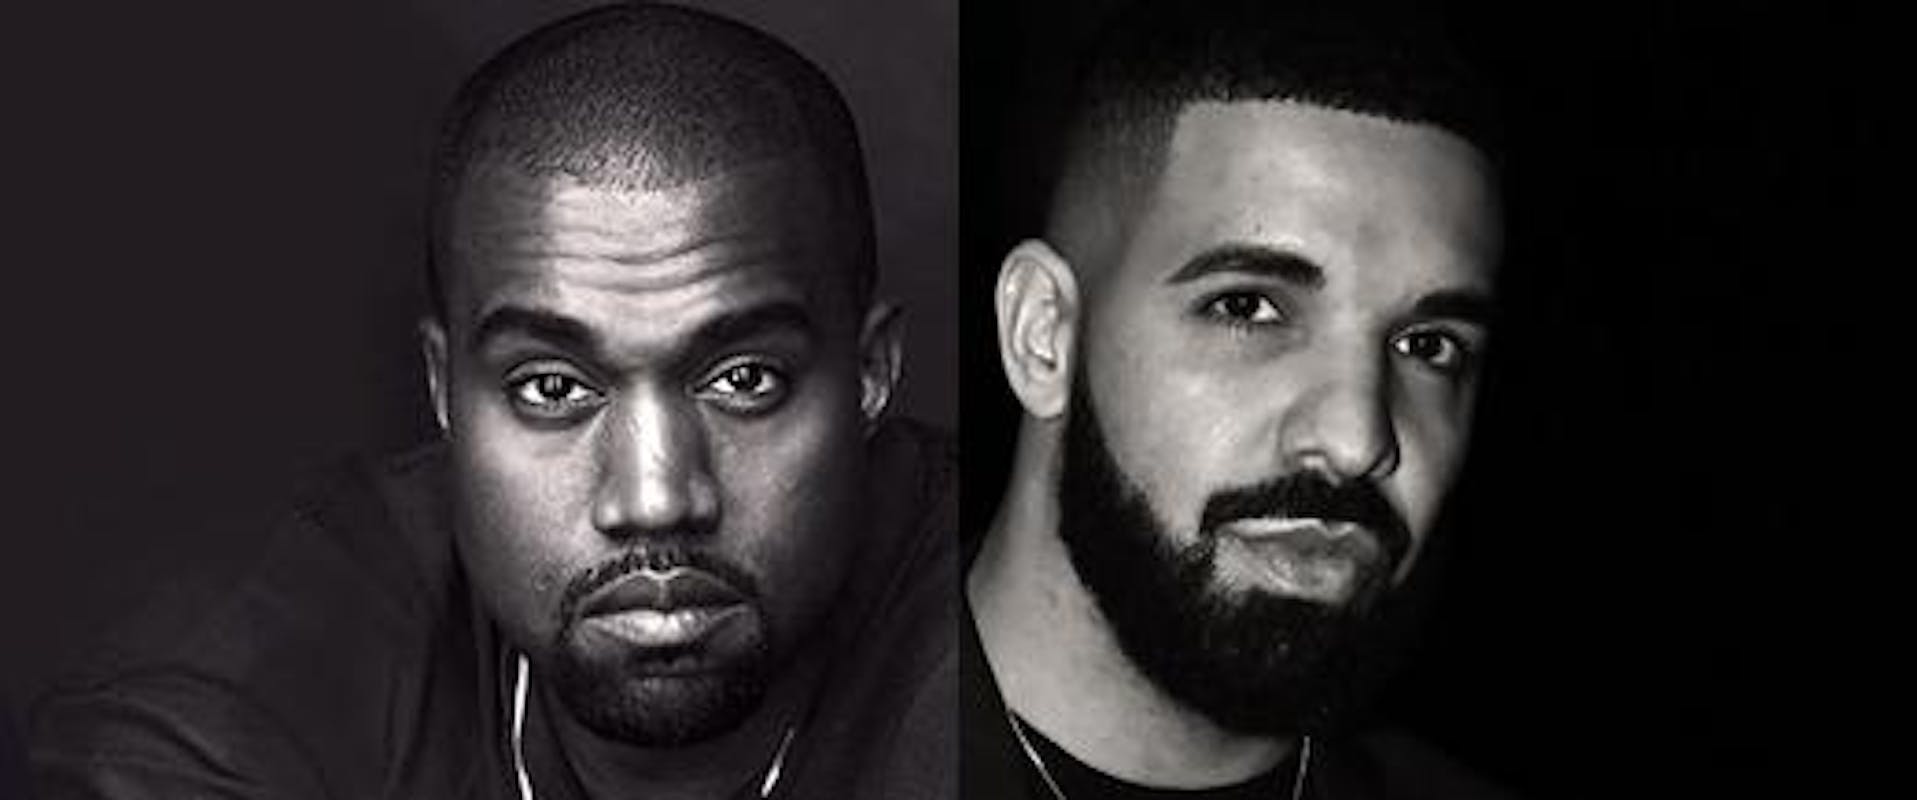 Drake vs Kayne West in the Battle of the Albums